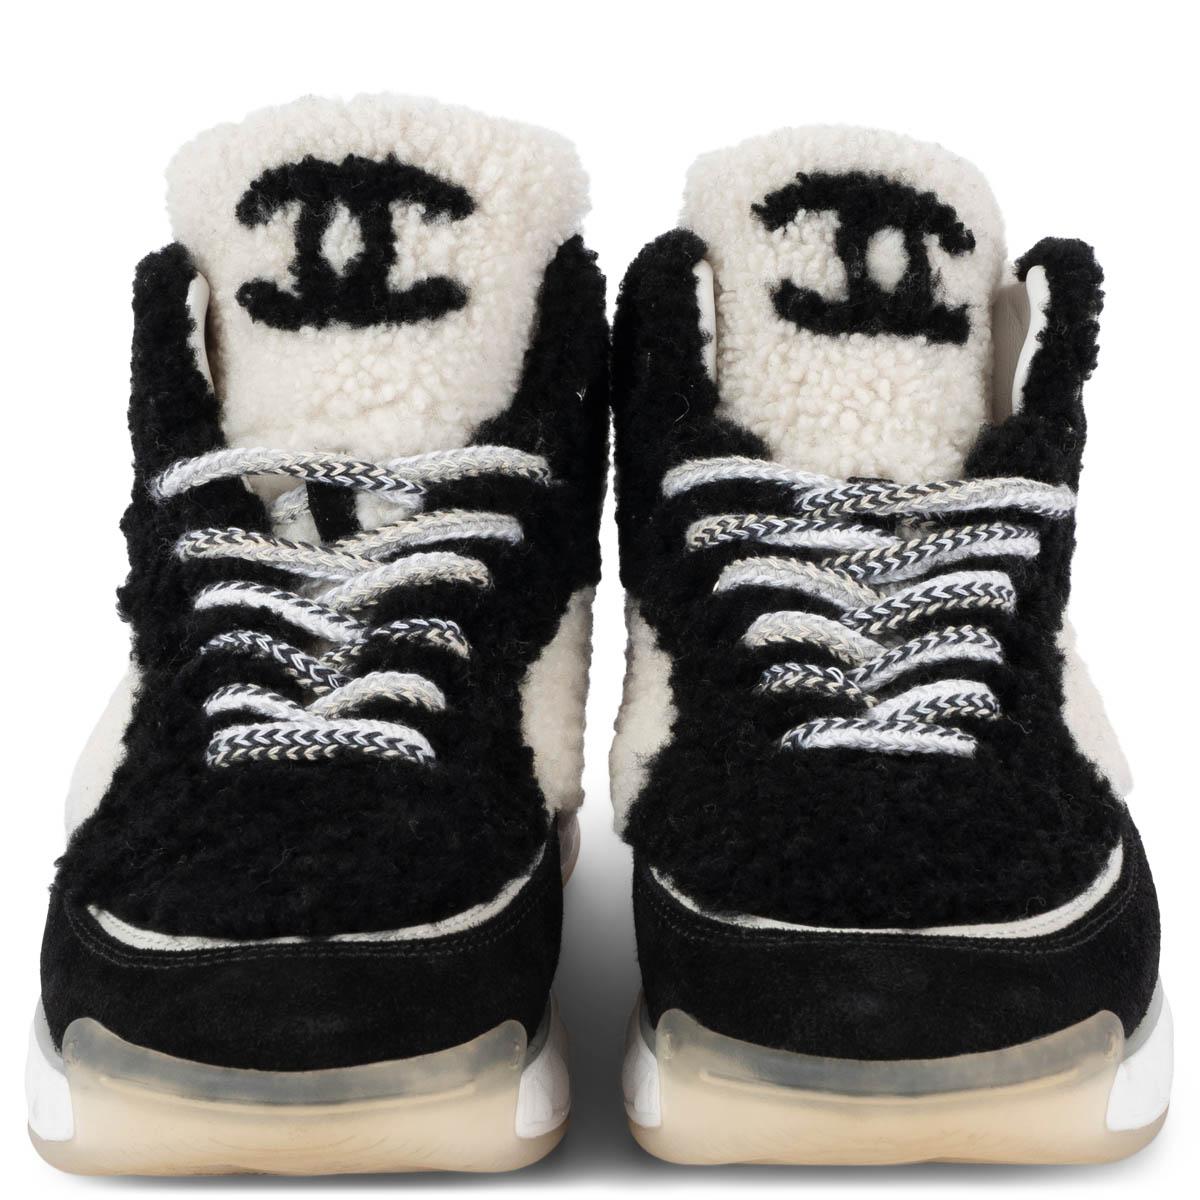 100% authentic Chanel lace-up high-top sneakers in black & white shearling and a black suede leather tip. The design features a chunky grey, white and clear rubber sole. Have been worn and show some very soft discoloration on the sole. Overall in